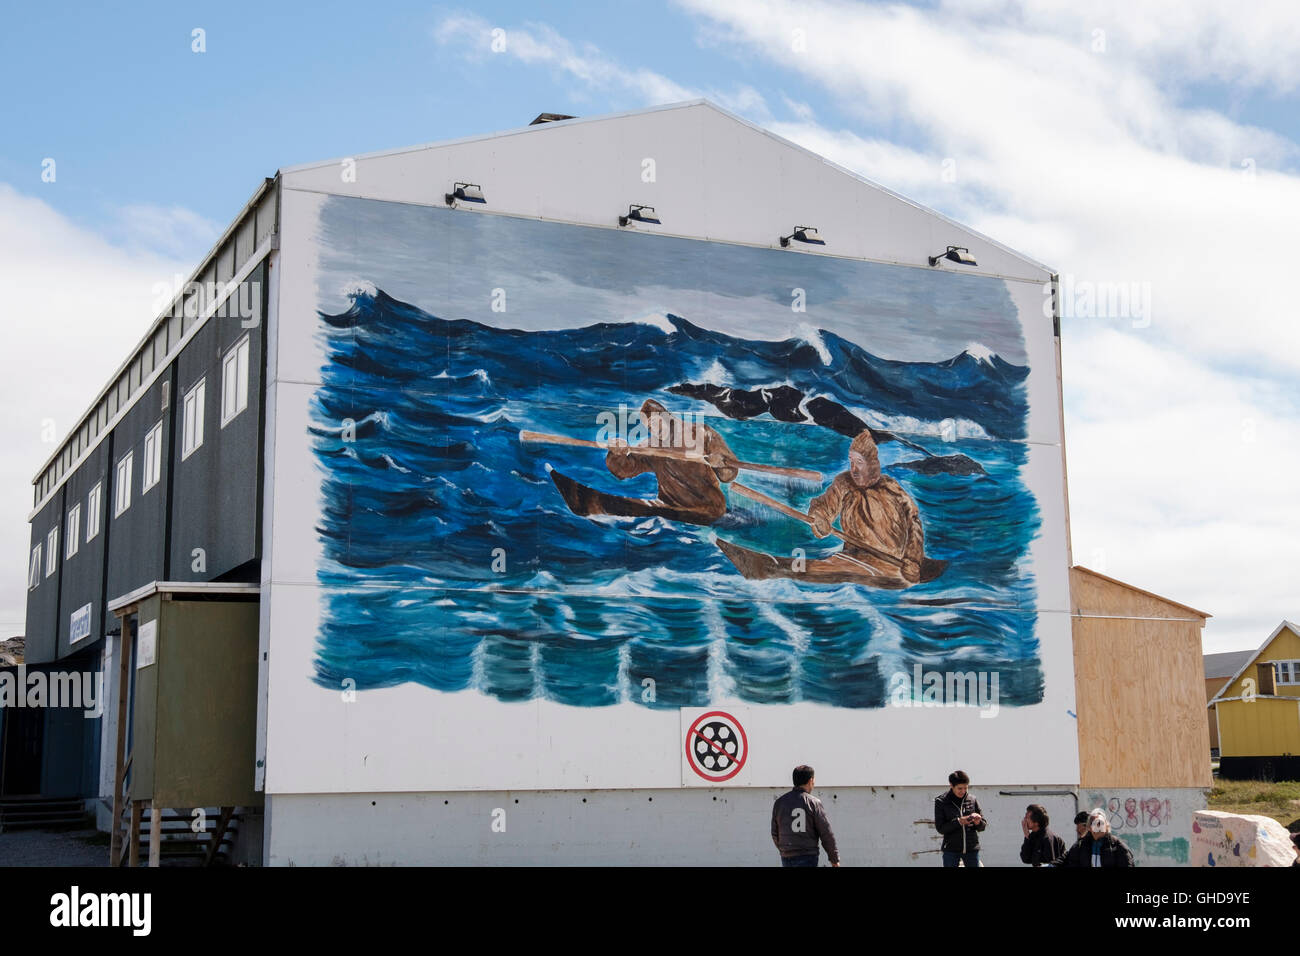 Mural depicting Inuit life kayaking scene painted on outside wall of a building where locals gather in Paamiut Greenland Stock Photo